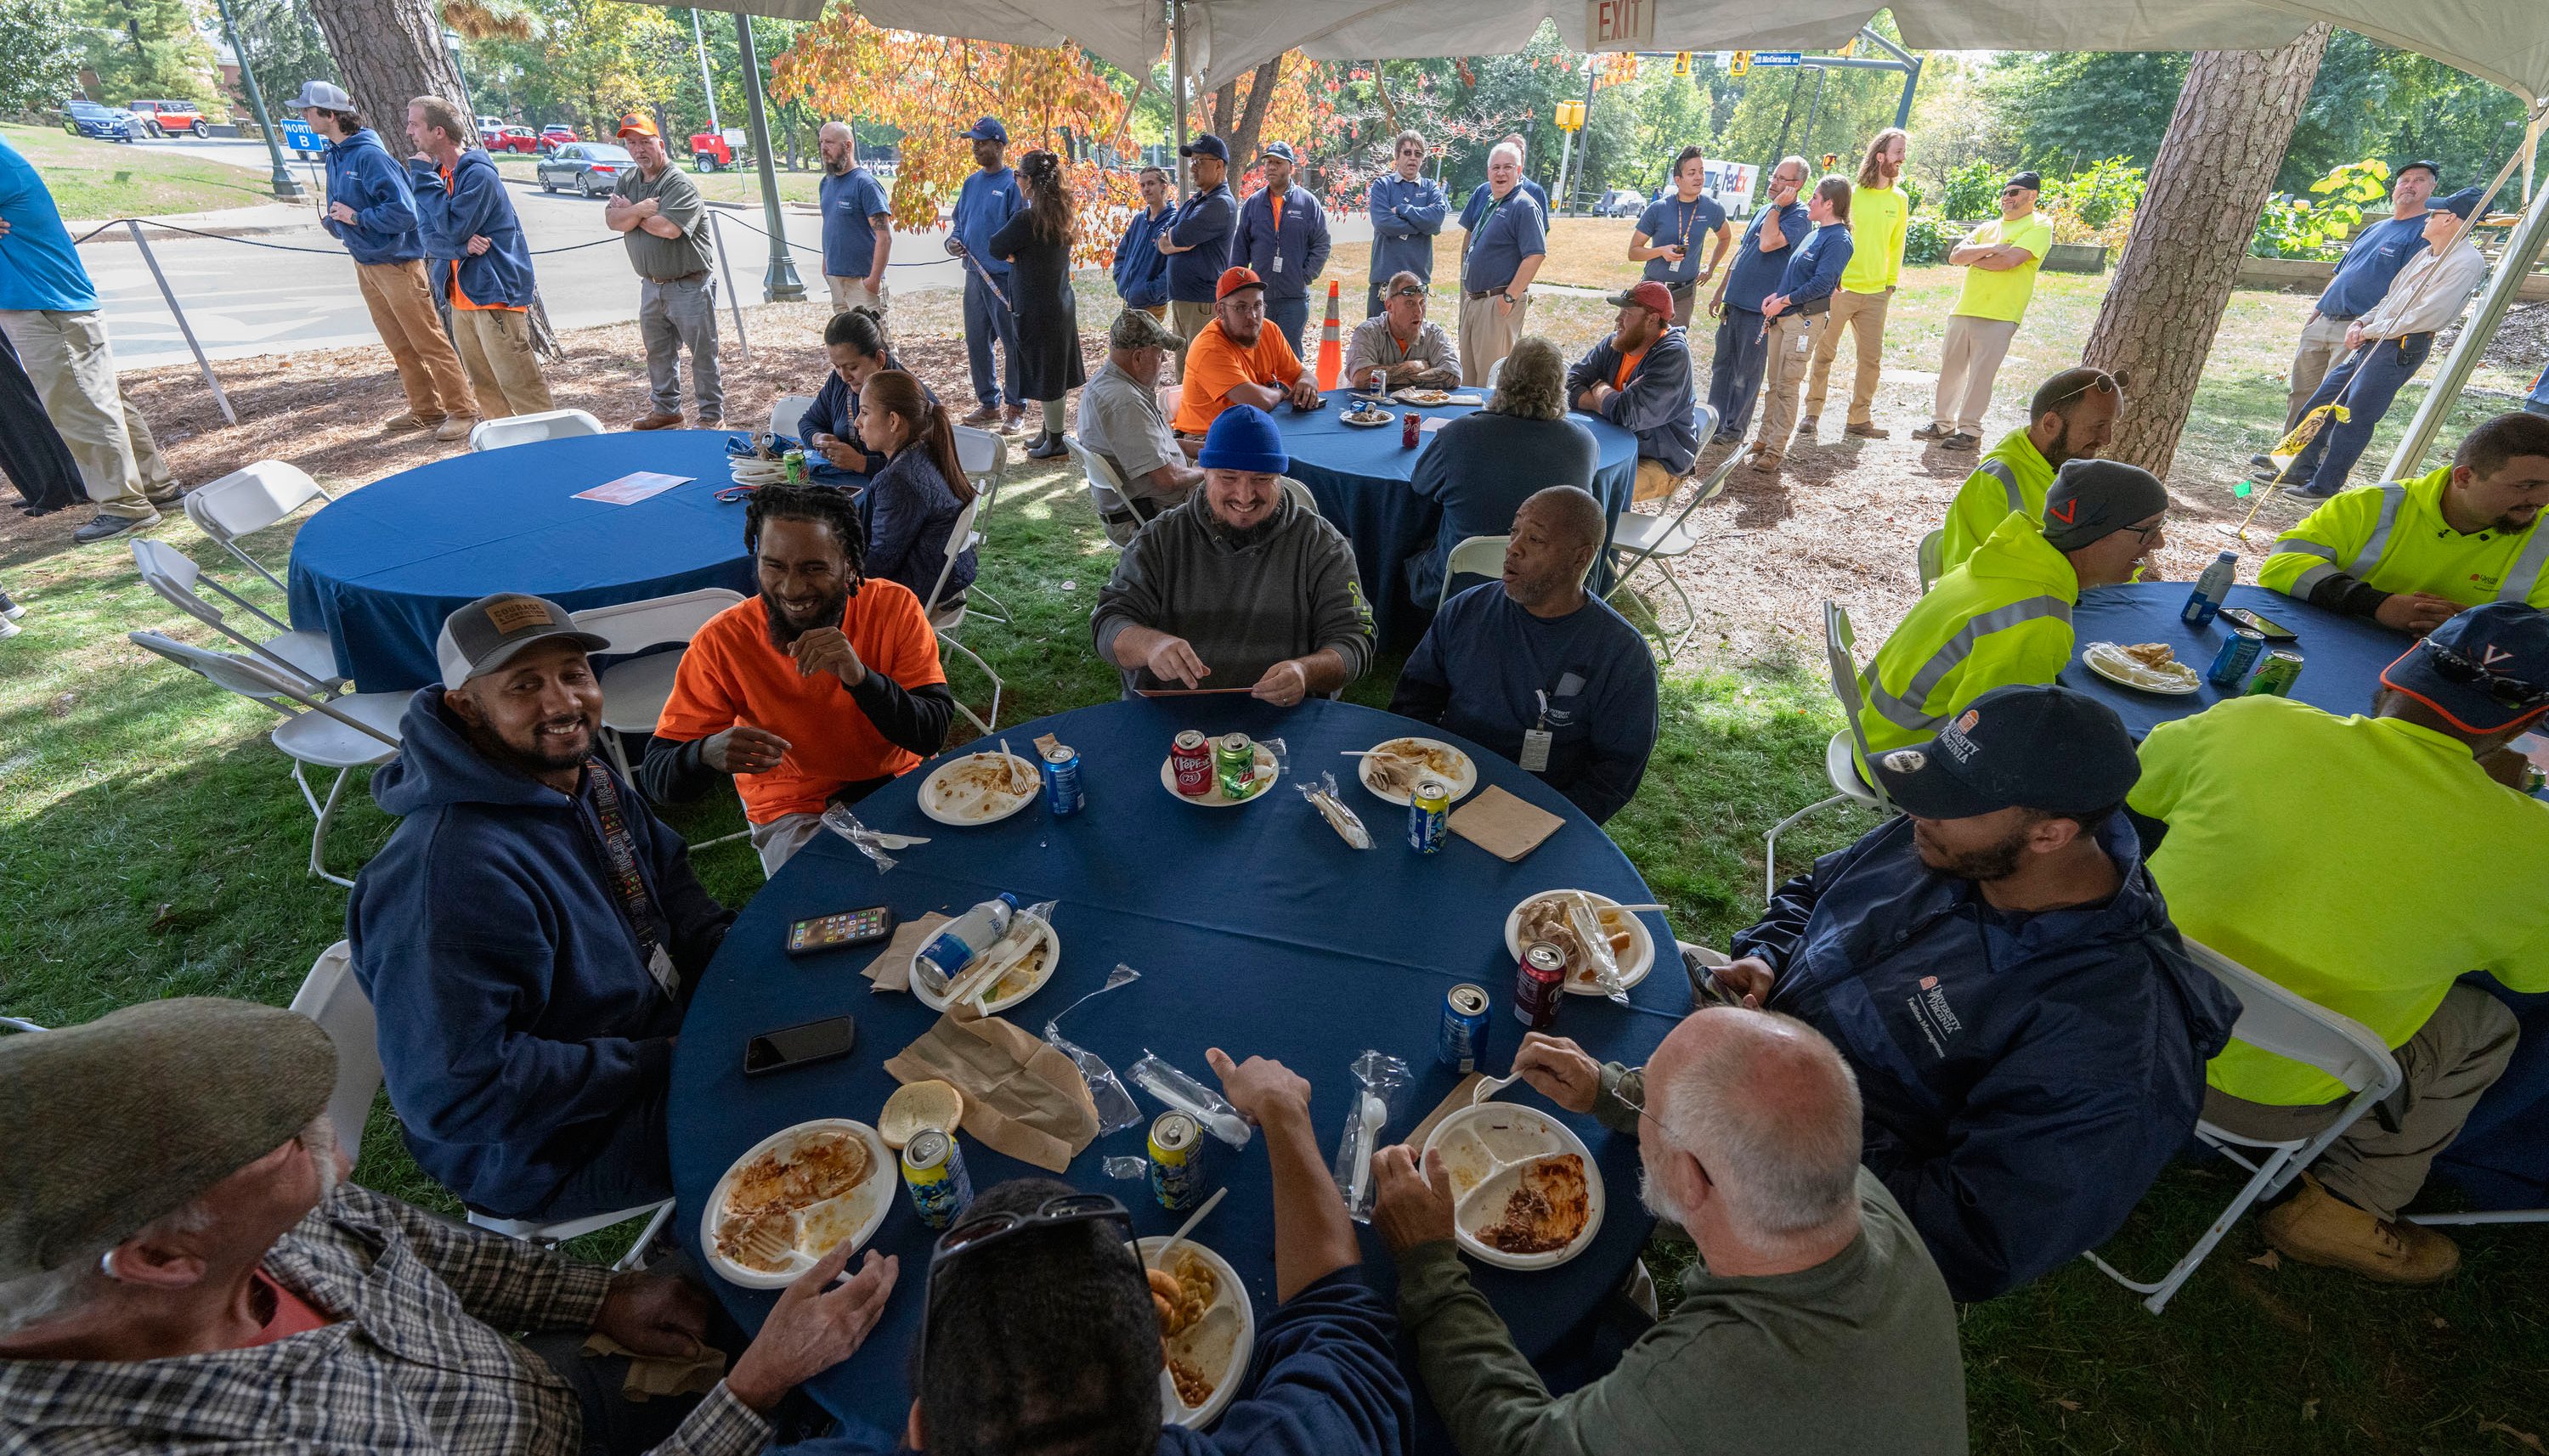 Read Thank You, FM! by UVA Facilities Management